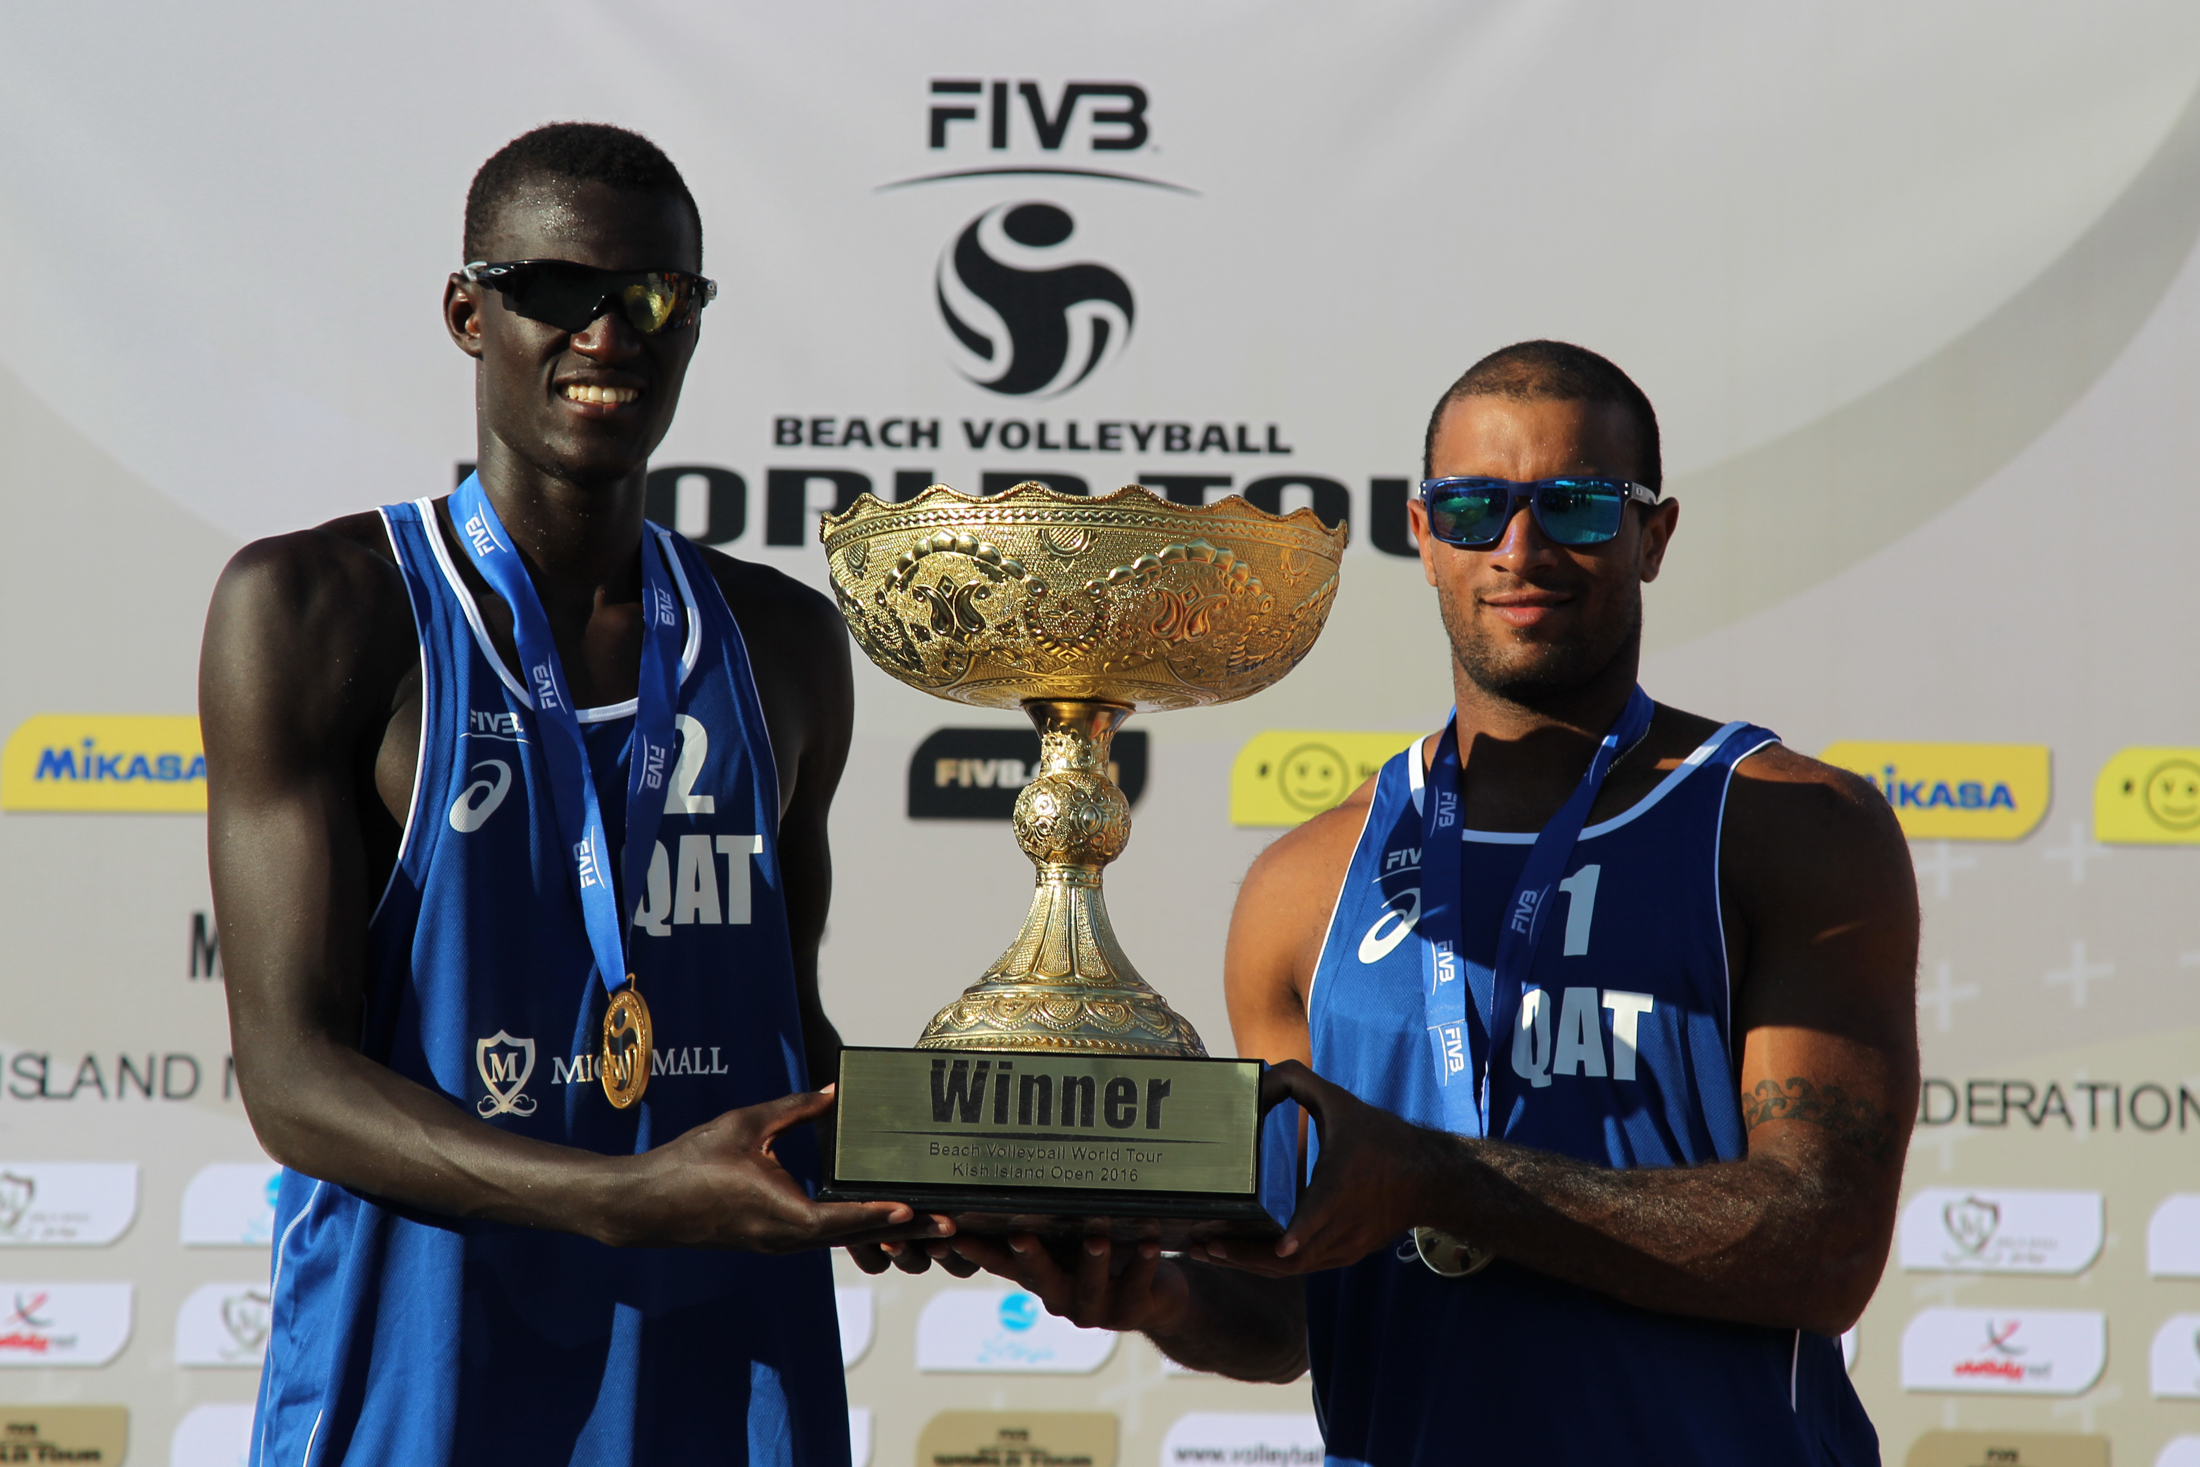 photo from fivb